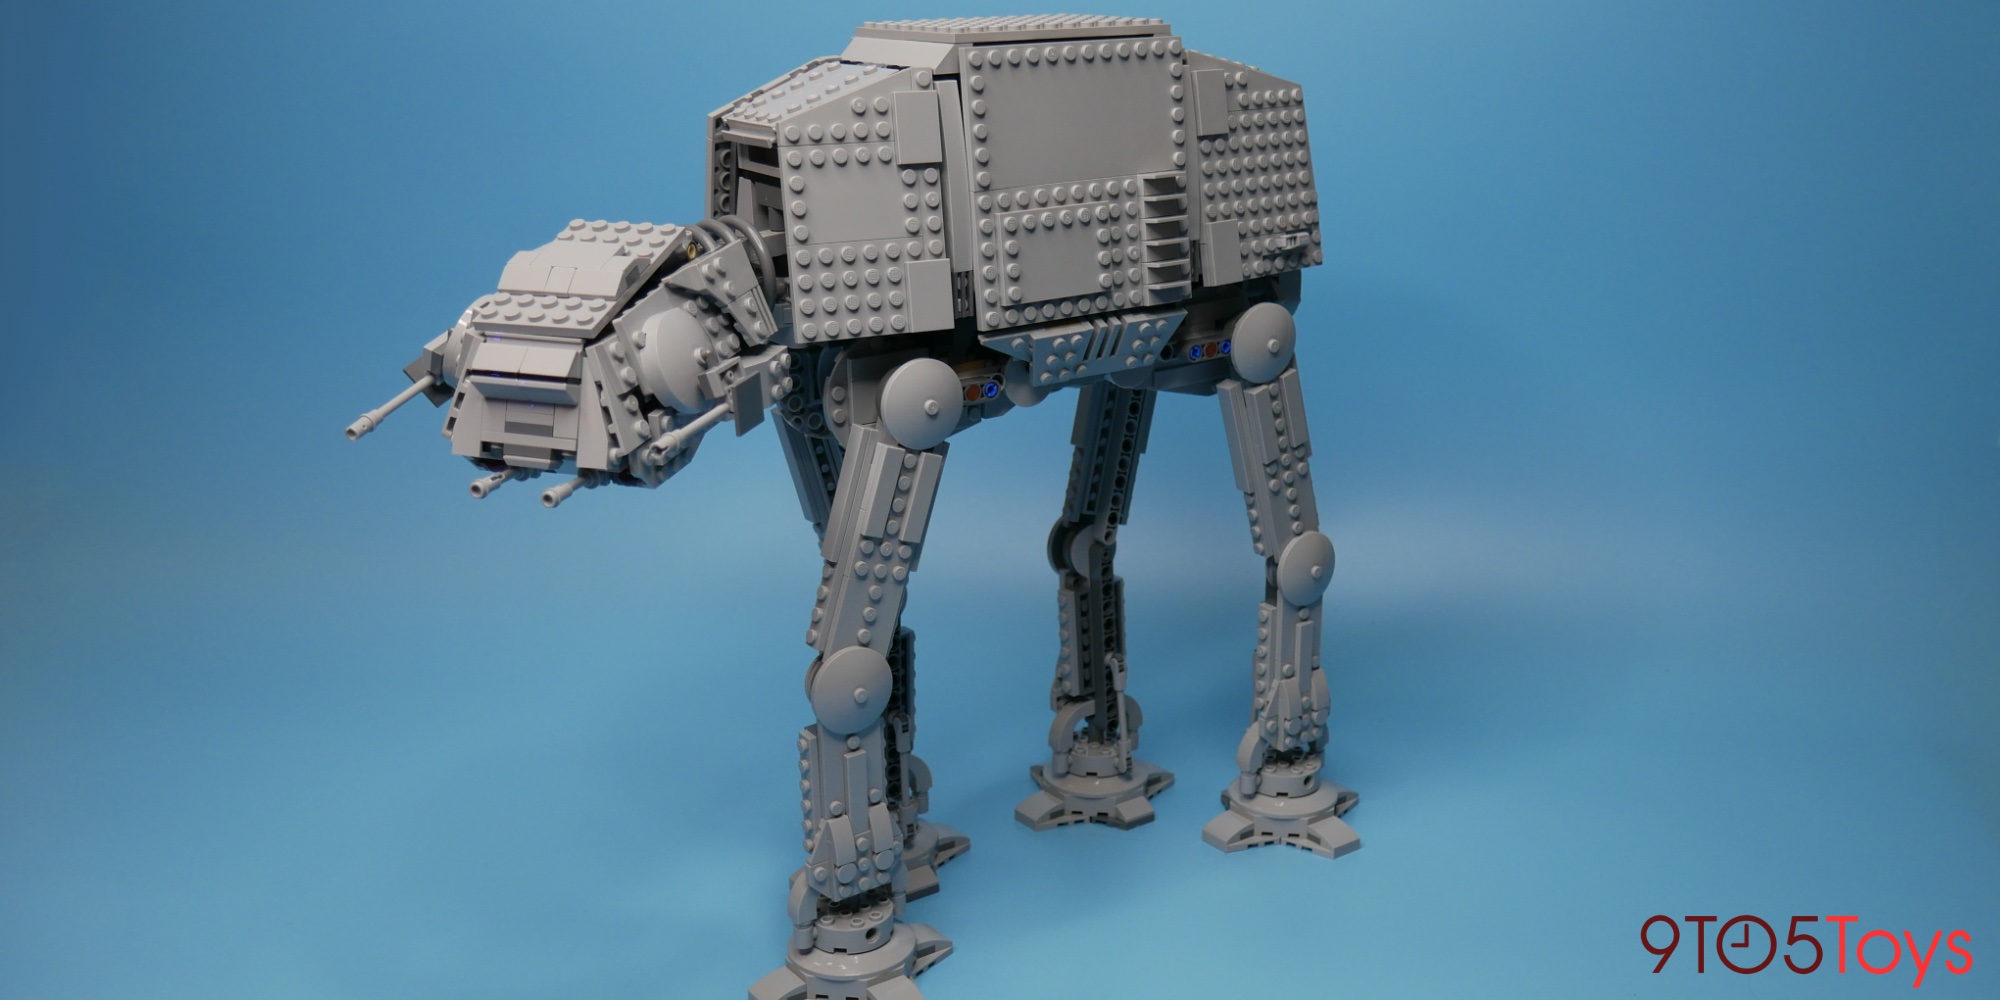 LEGO AT-AT review: The best brick-built version to date - 9to5Toys